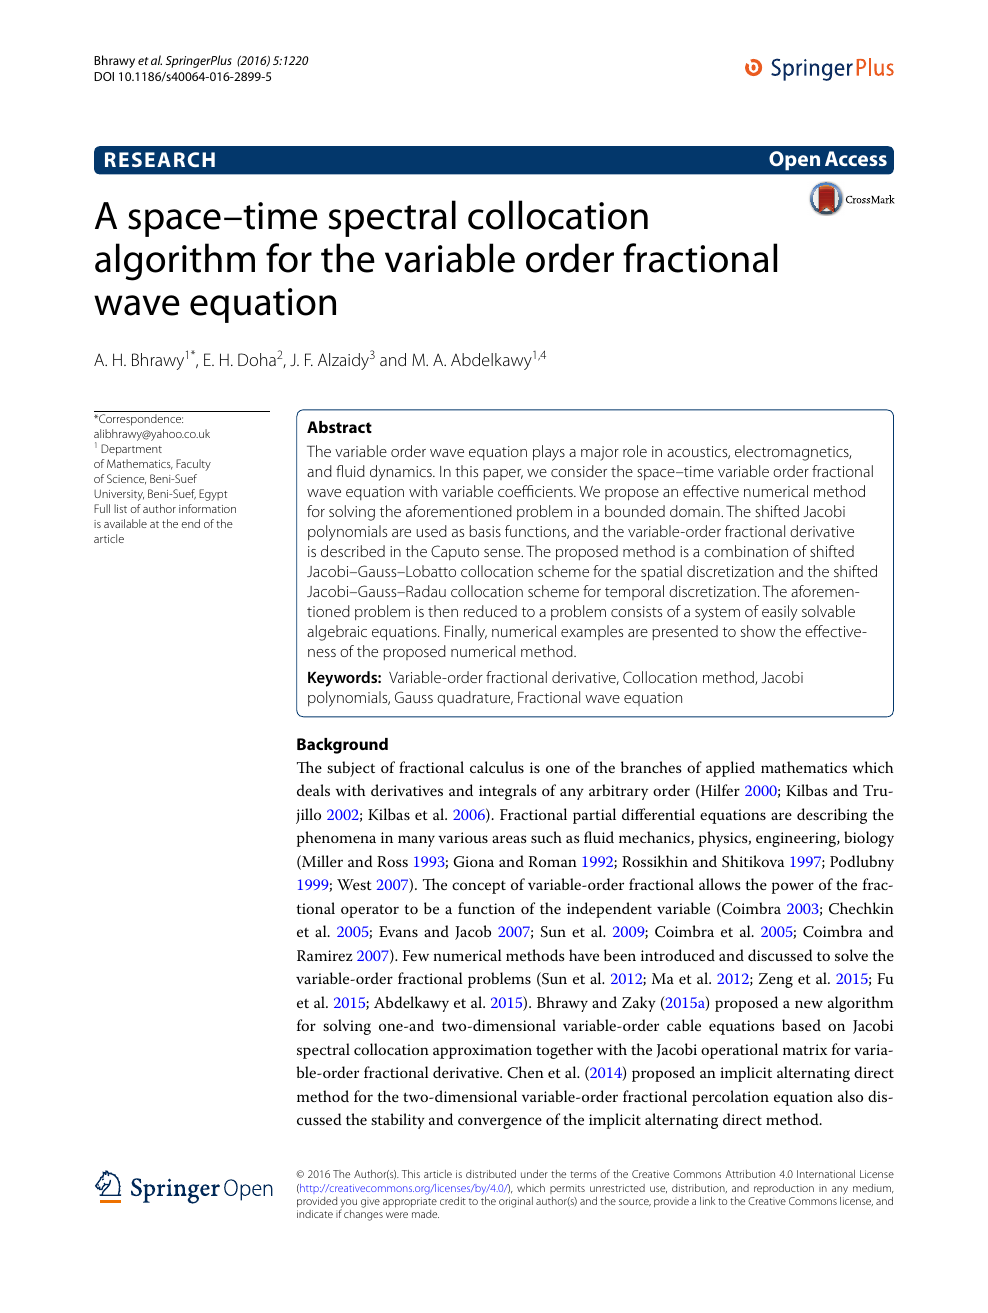 A Space Time Spectral Collocation Algorithm For The Variable Order Fractional Wave Equation Topic Of Research Paper In Mathematics Download Scholarly Article Pdf And Read For Free On Cyberleninka Open Science Hub